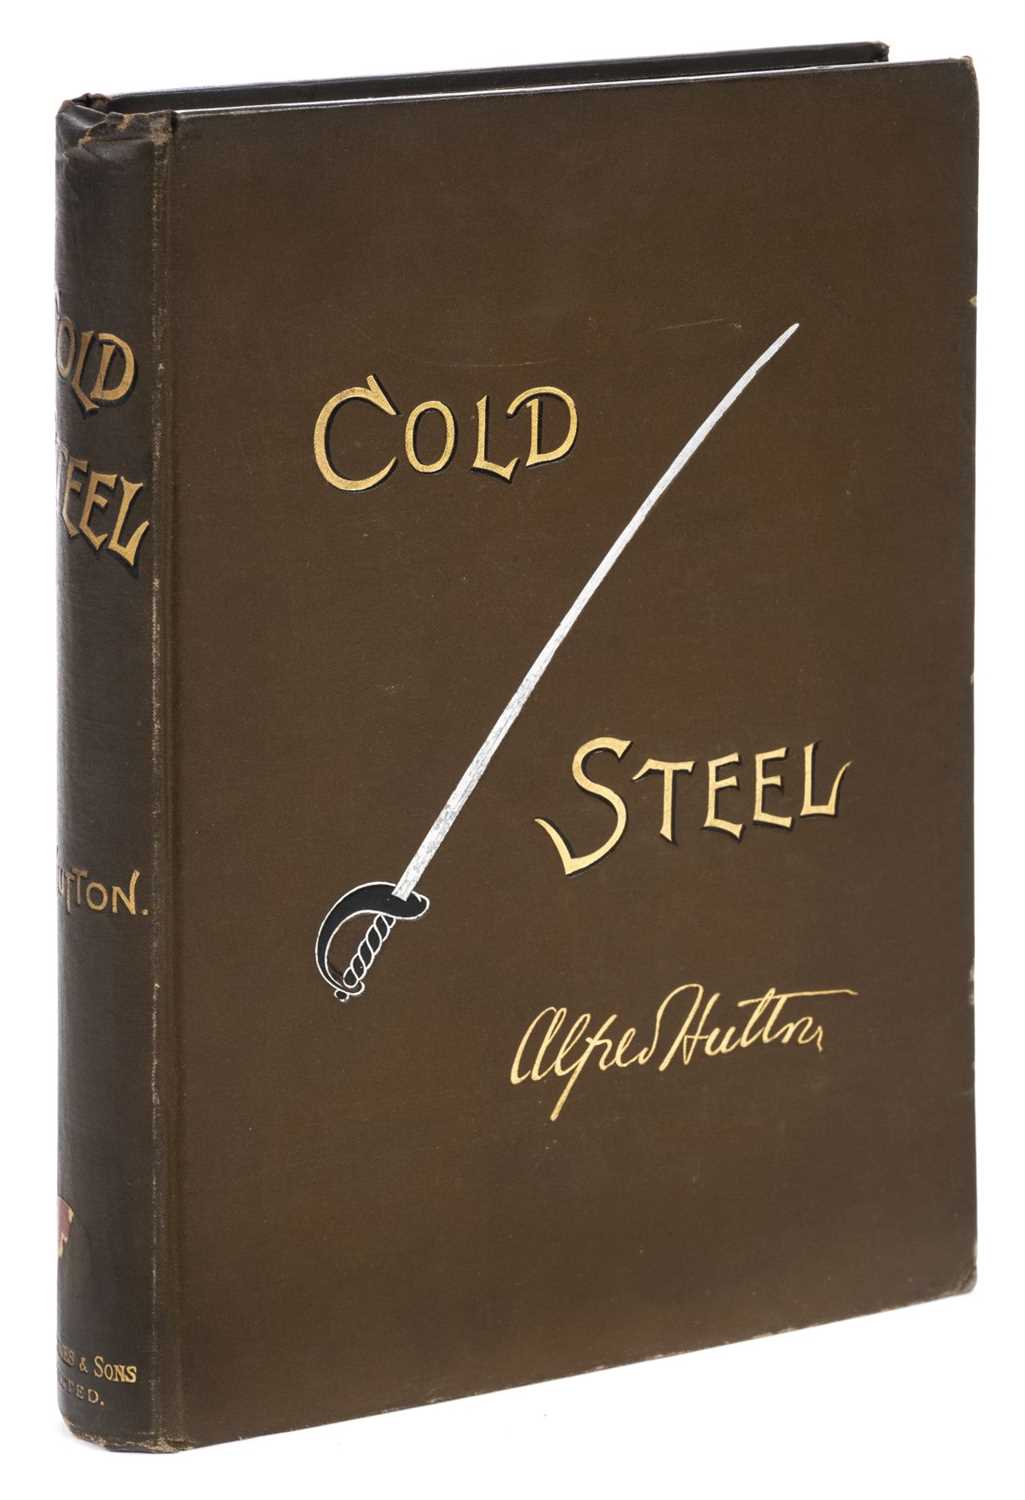 Lot 481 - Hutton (Alfred). Cold Steel: A Practical Treatise on the Sabre, 1st edition., 1889